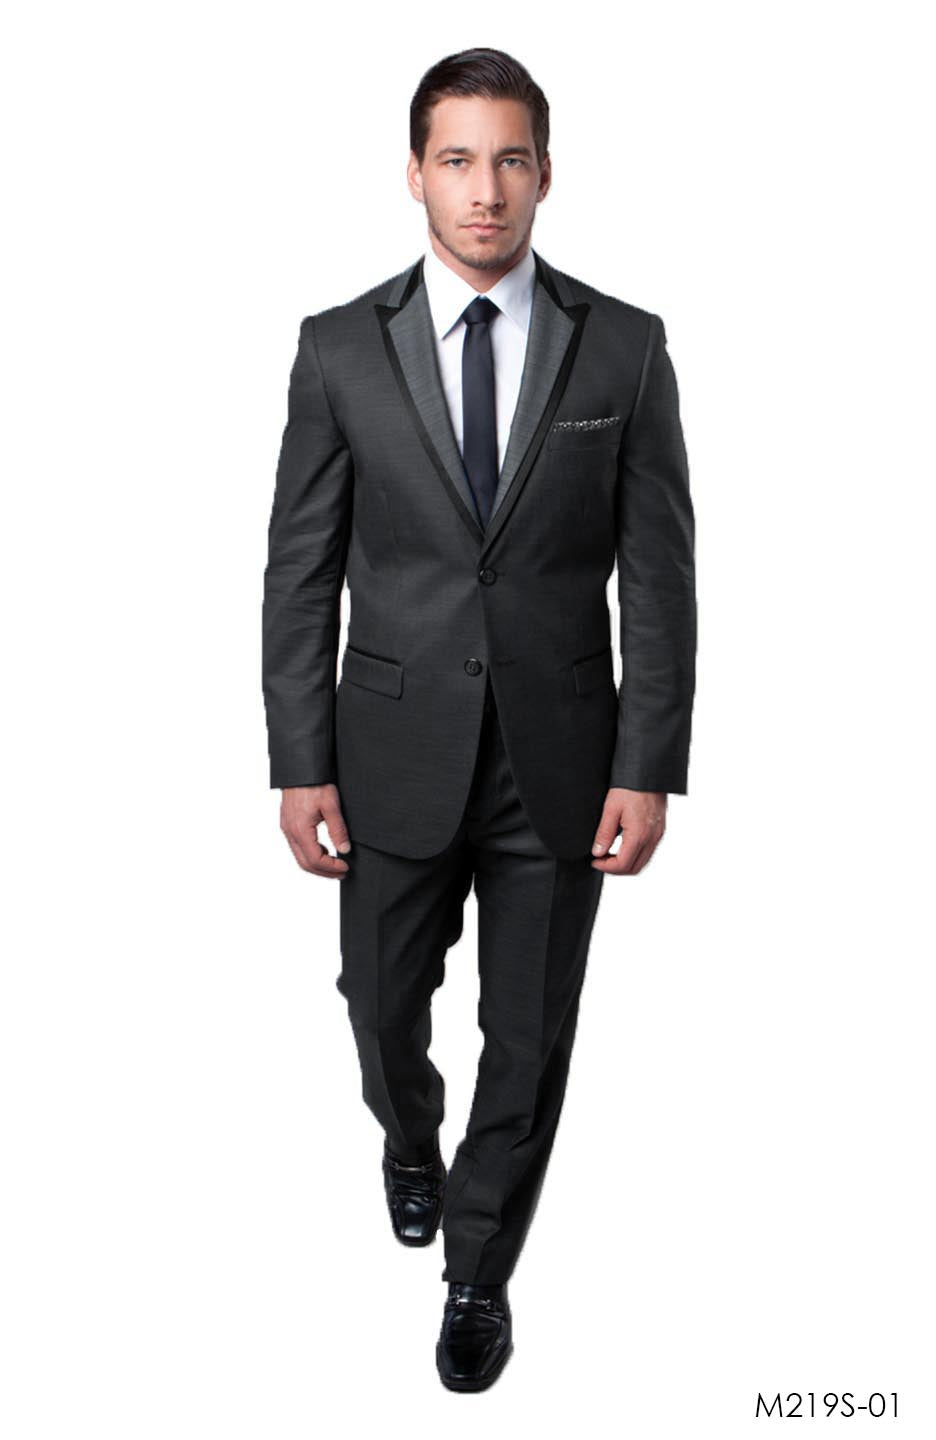 Charcoal / Black Suit For Men Formal Suits For All Ocassions M219S-01